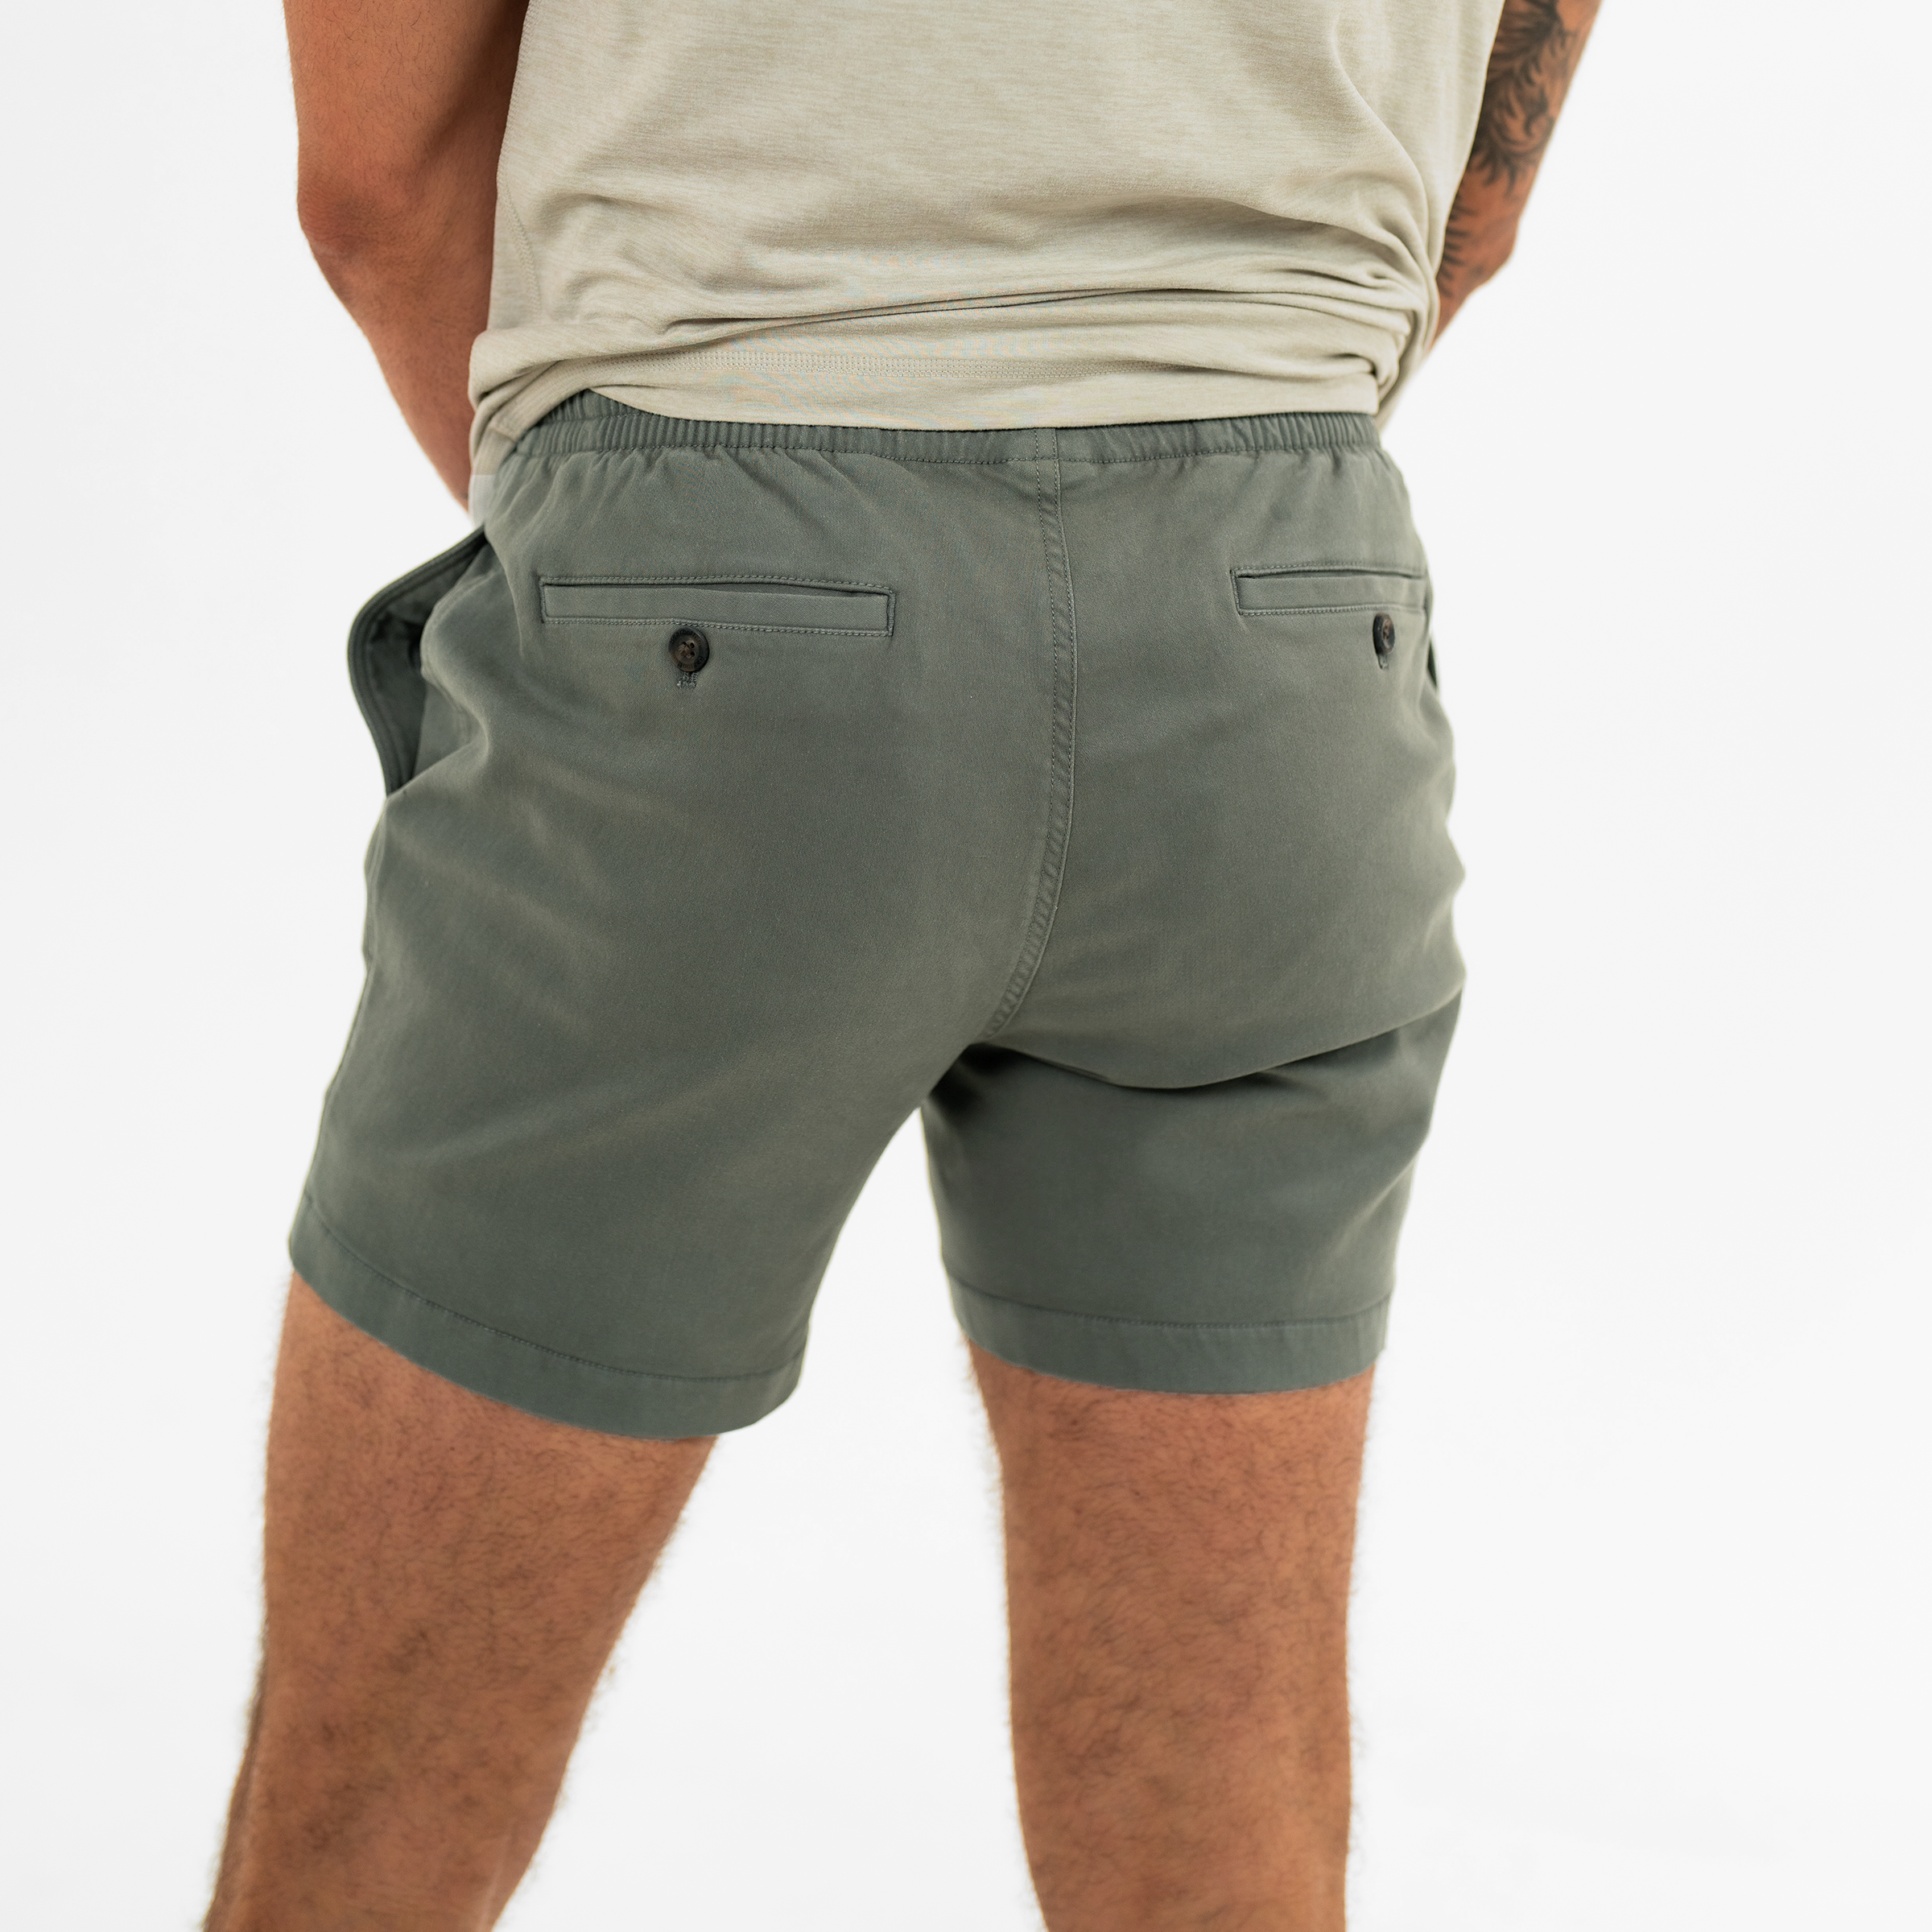 Alto Short 5.5" inseam in Grey back on model with elastic waistband and two welt pocket with horn buttons